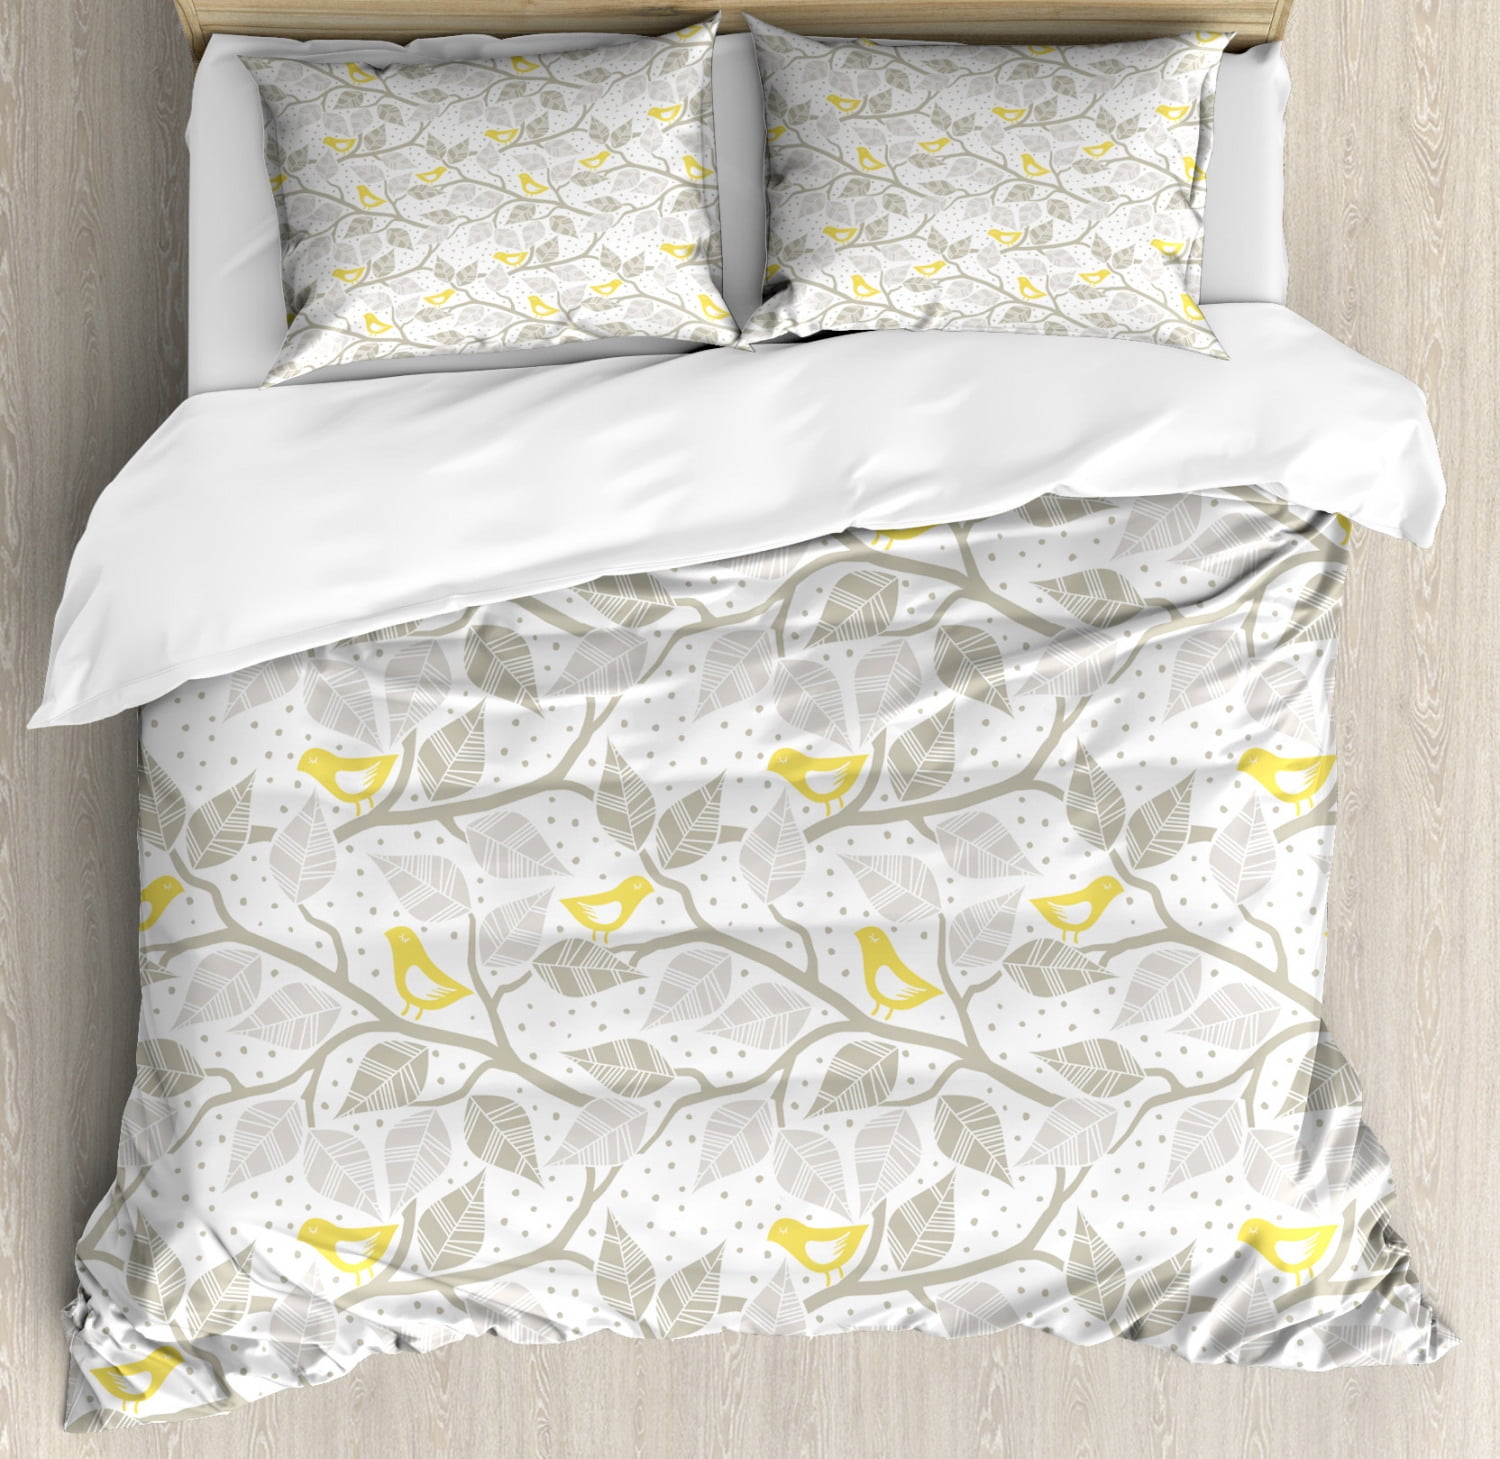 GREY AND MUSTARD Duvet Cover PILLOW CASE Reversible Quilt Bedding Set Easy Care 